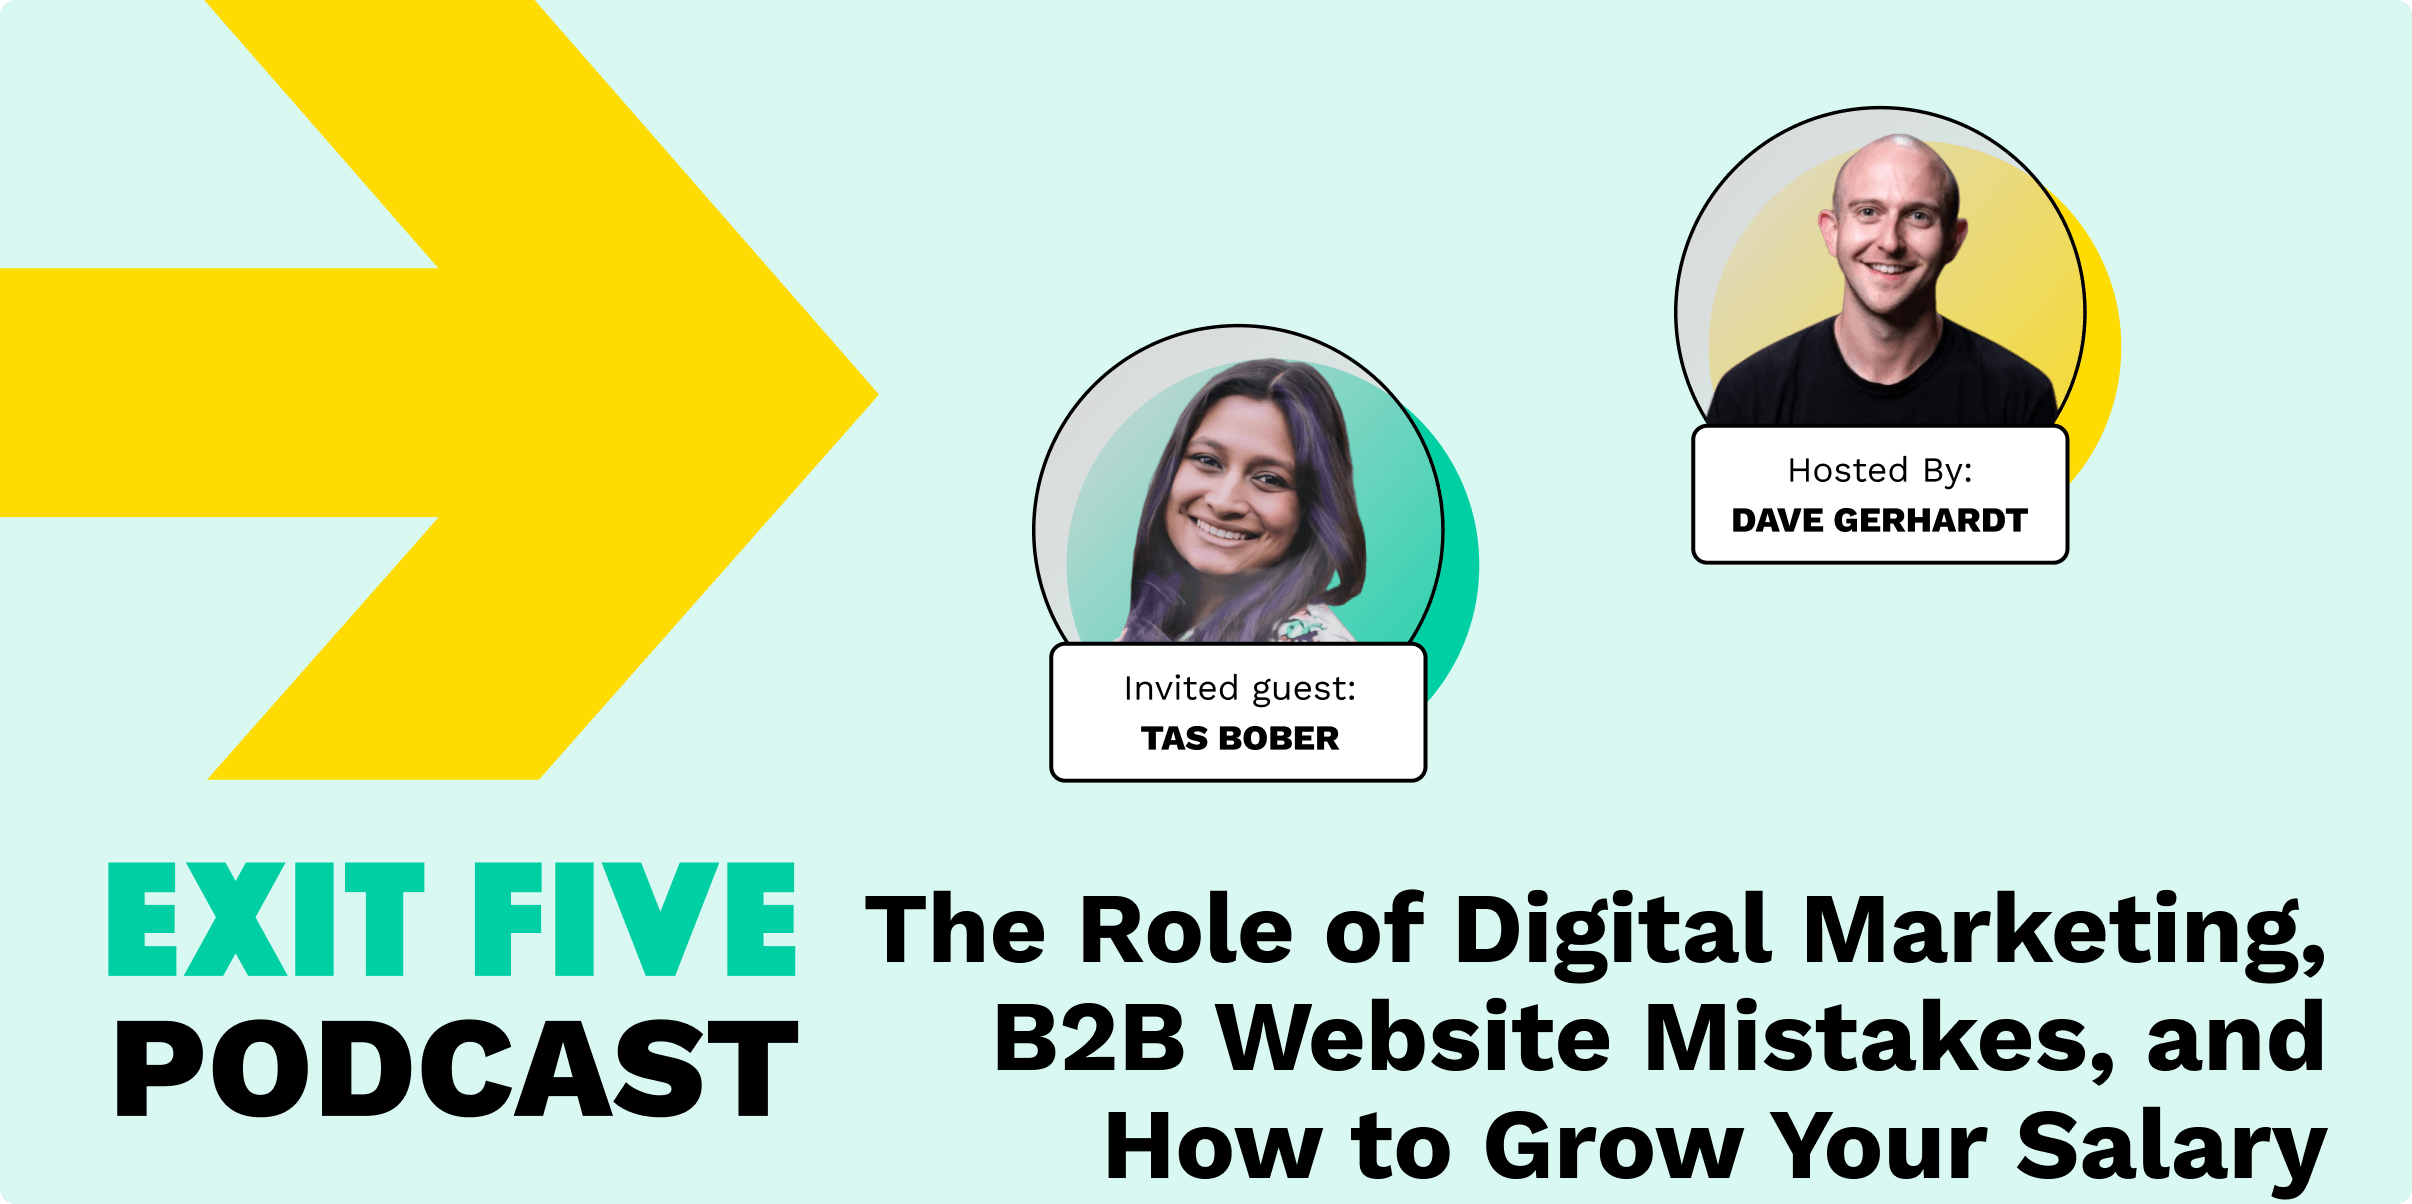 The Role of Digital Marketing, B2B Website Mistakes, and How to Grow Your Salary as an Employee (with Tas Bober)